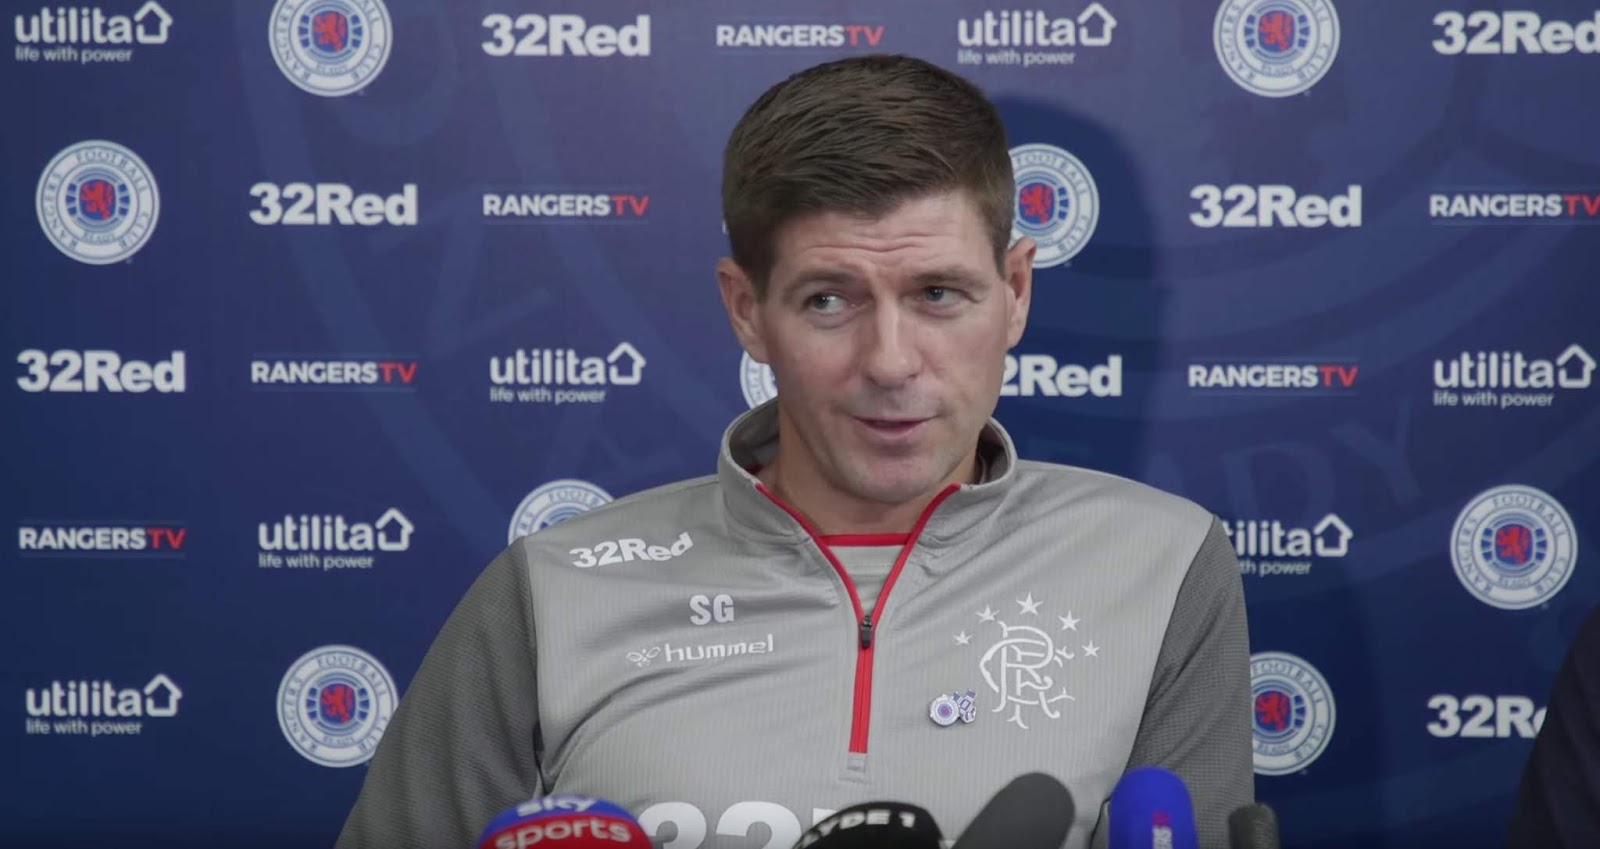 “Baffling” – Steven Gerrard’s comments today have us scratching our heads…